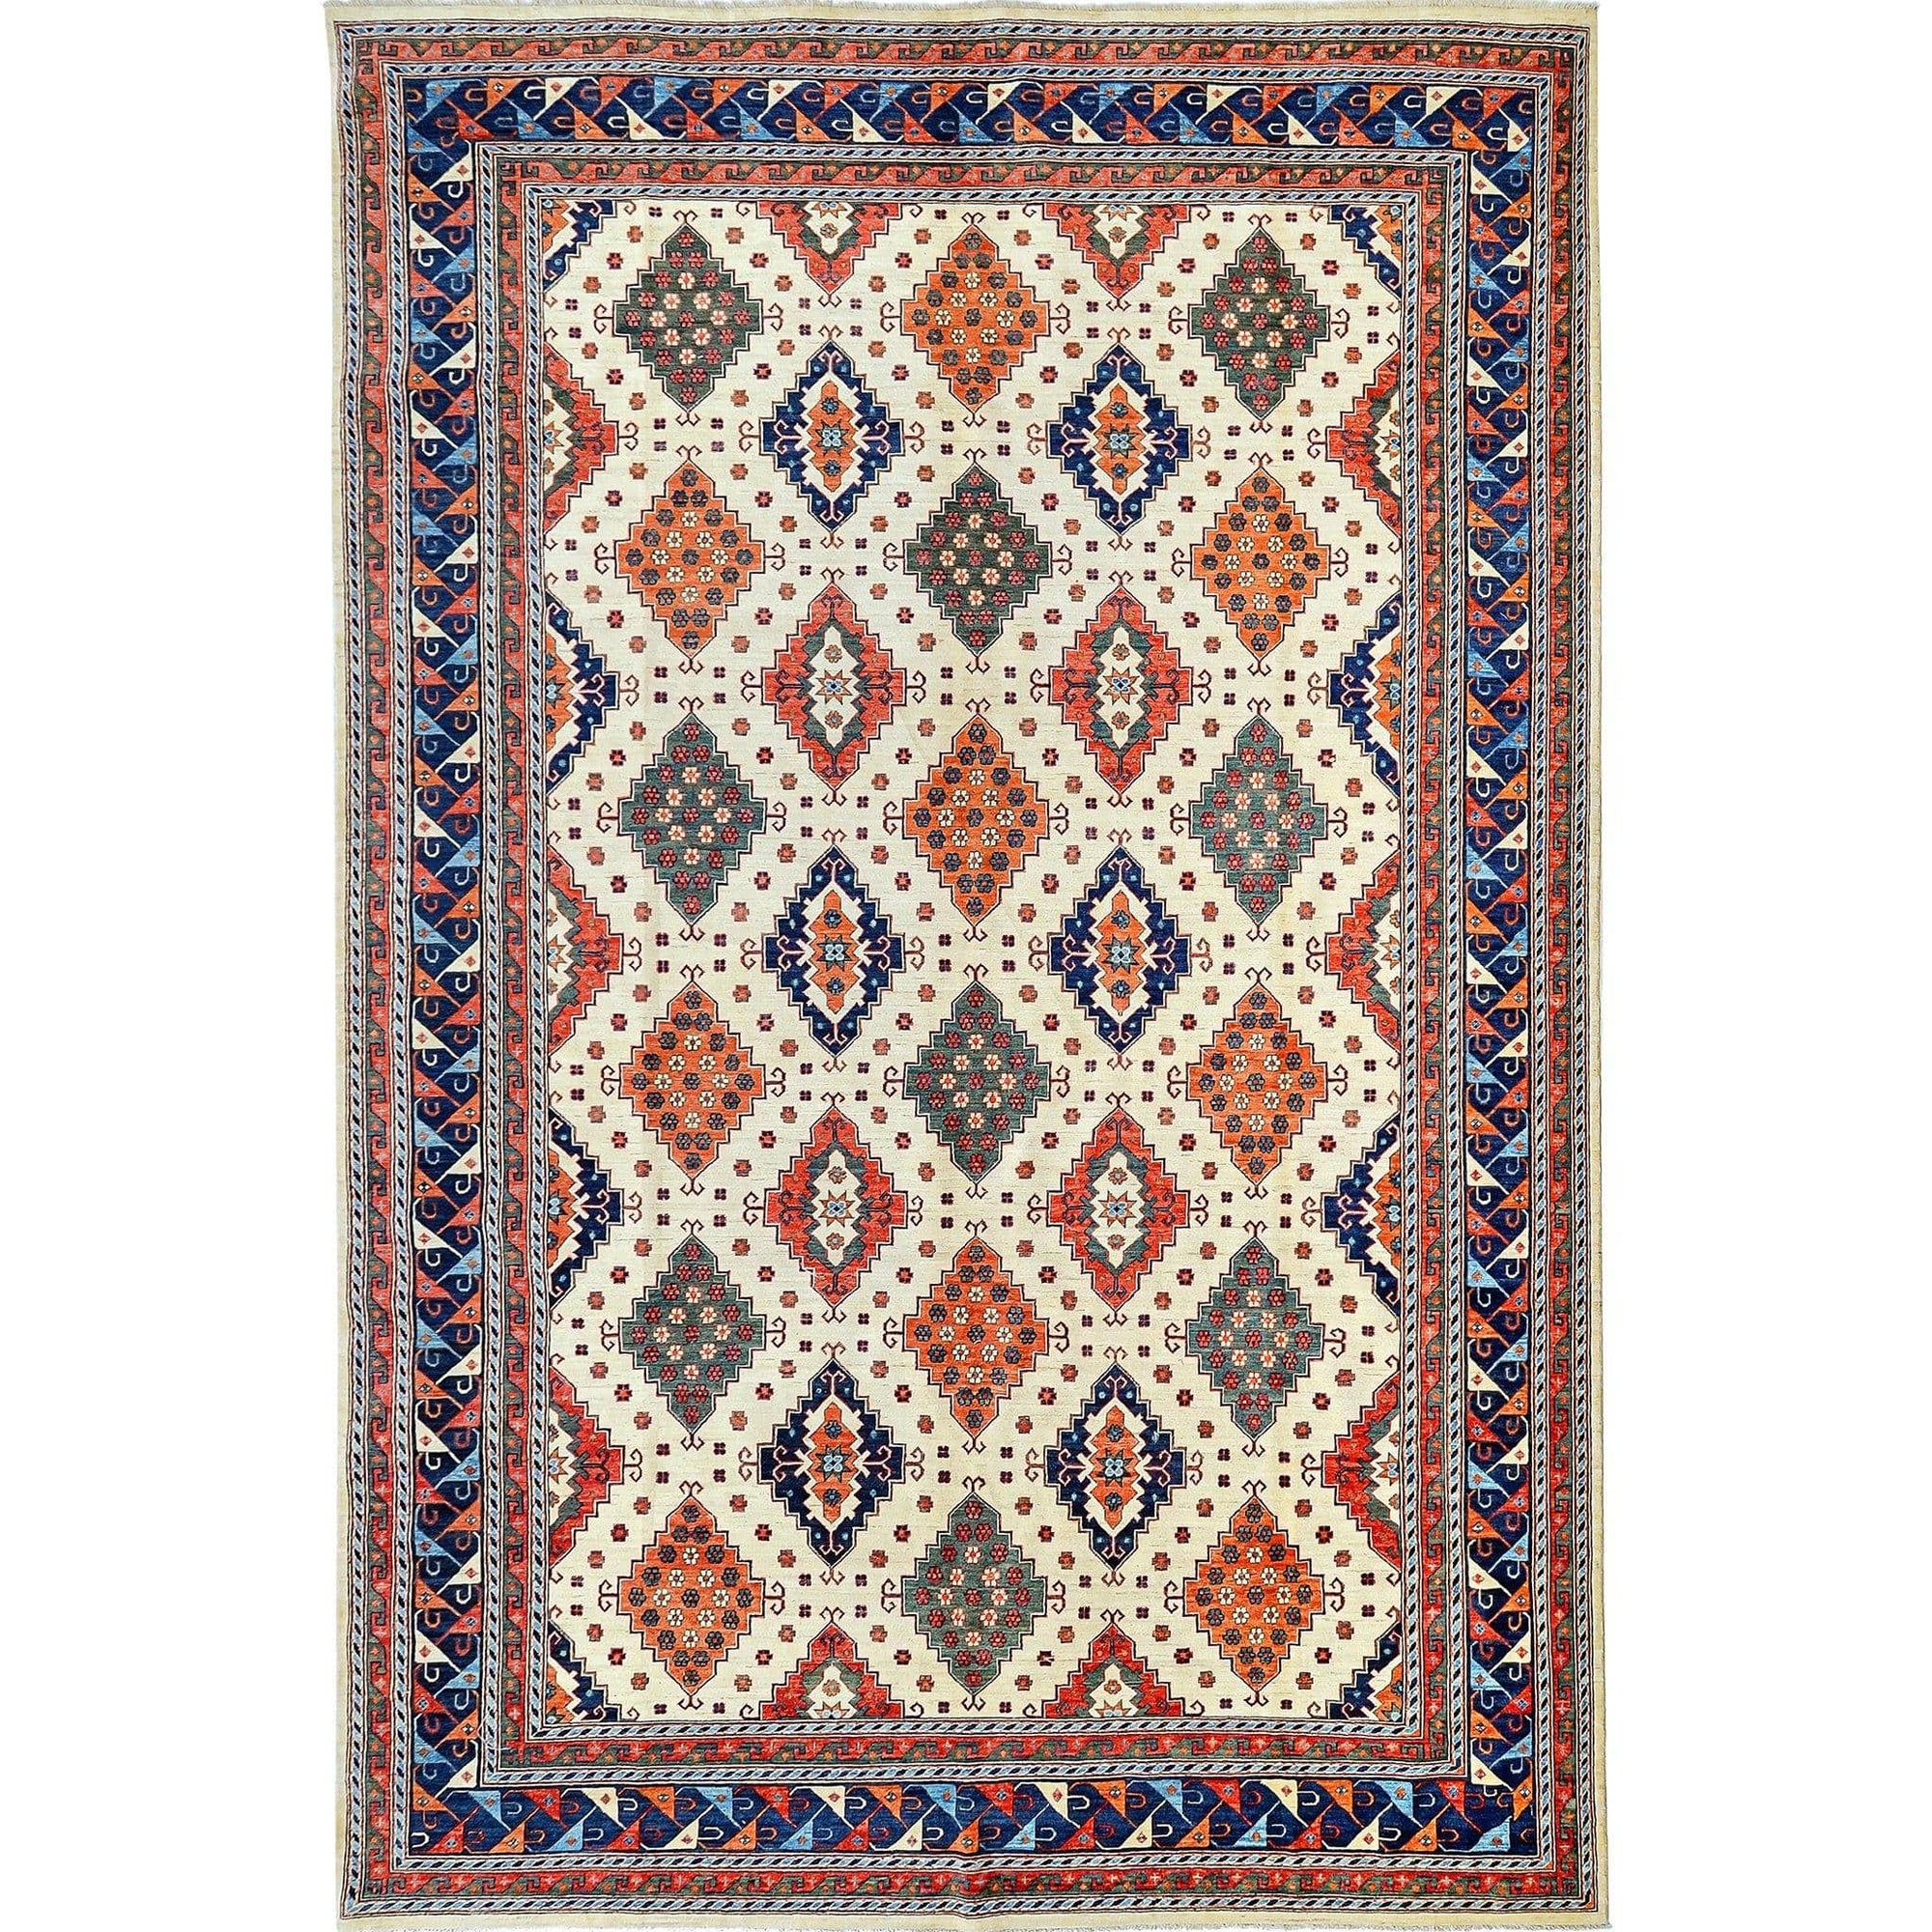 Fine Hand-knotted Wool Rug 299cm x 415cm